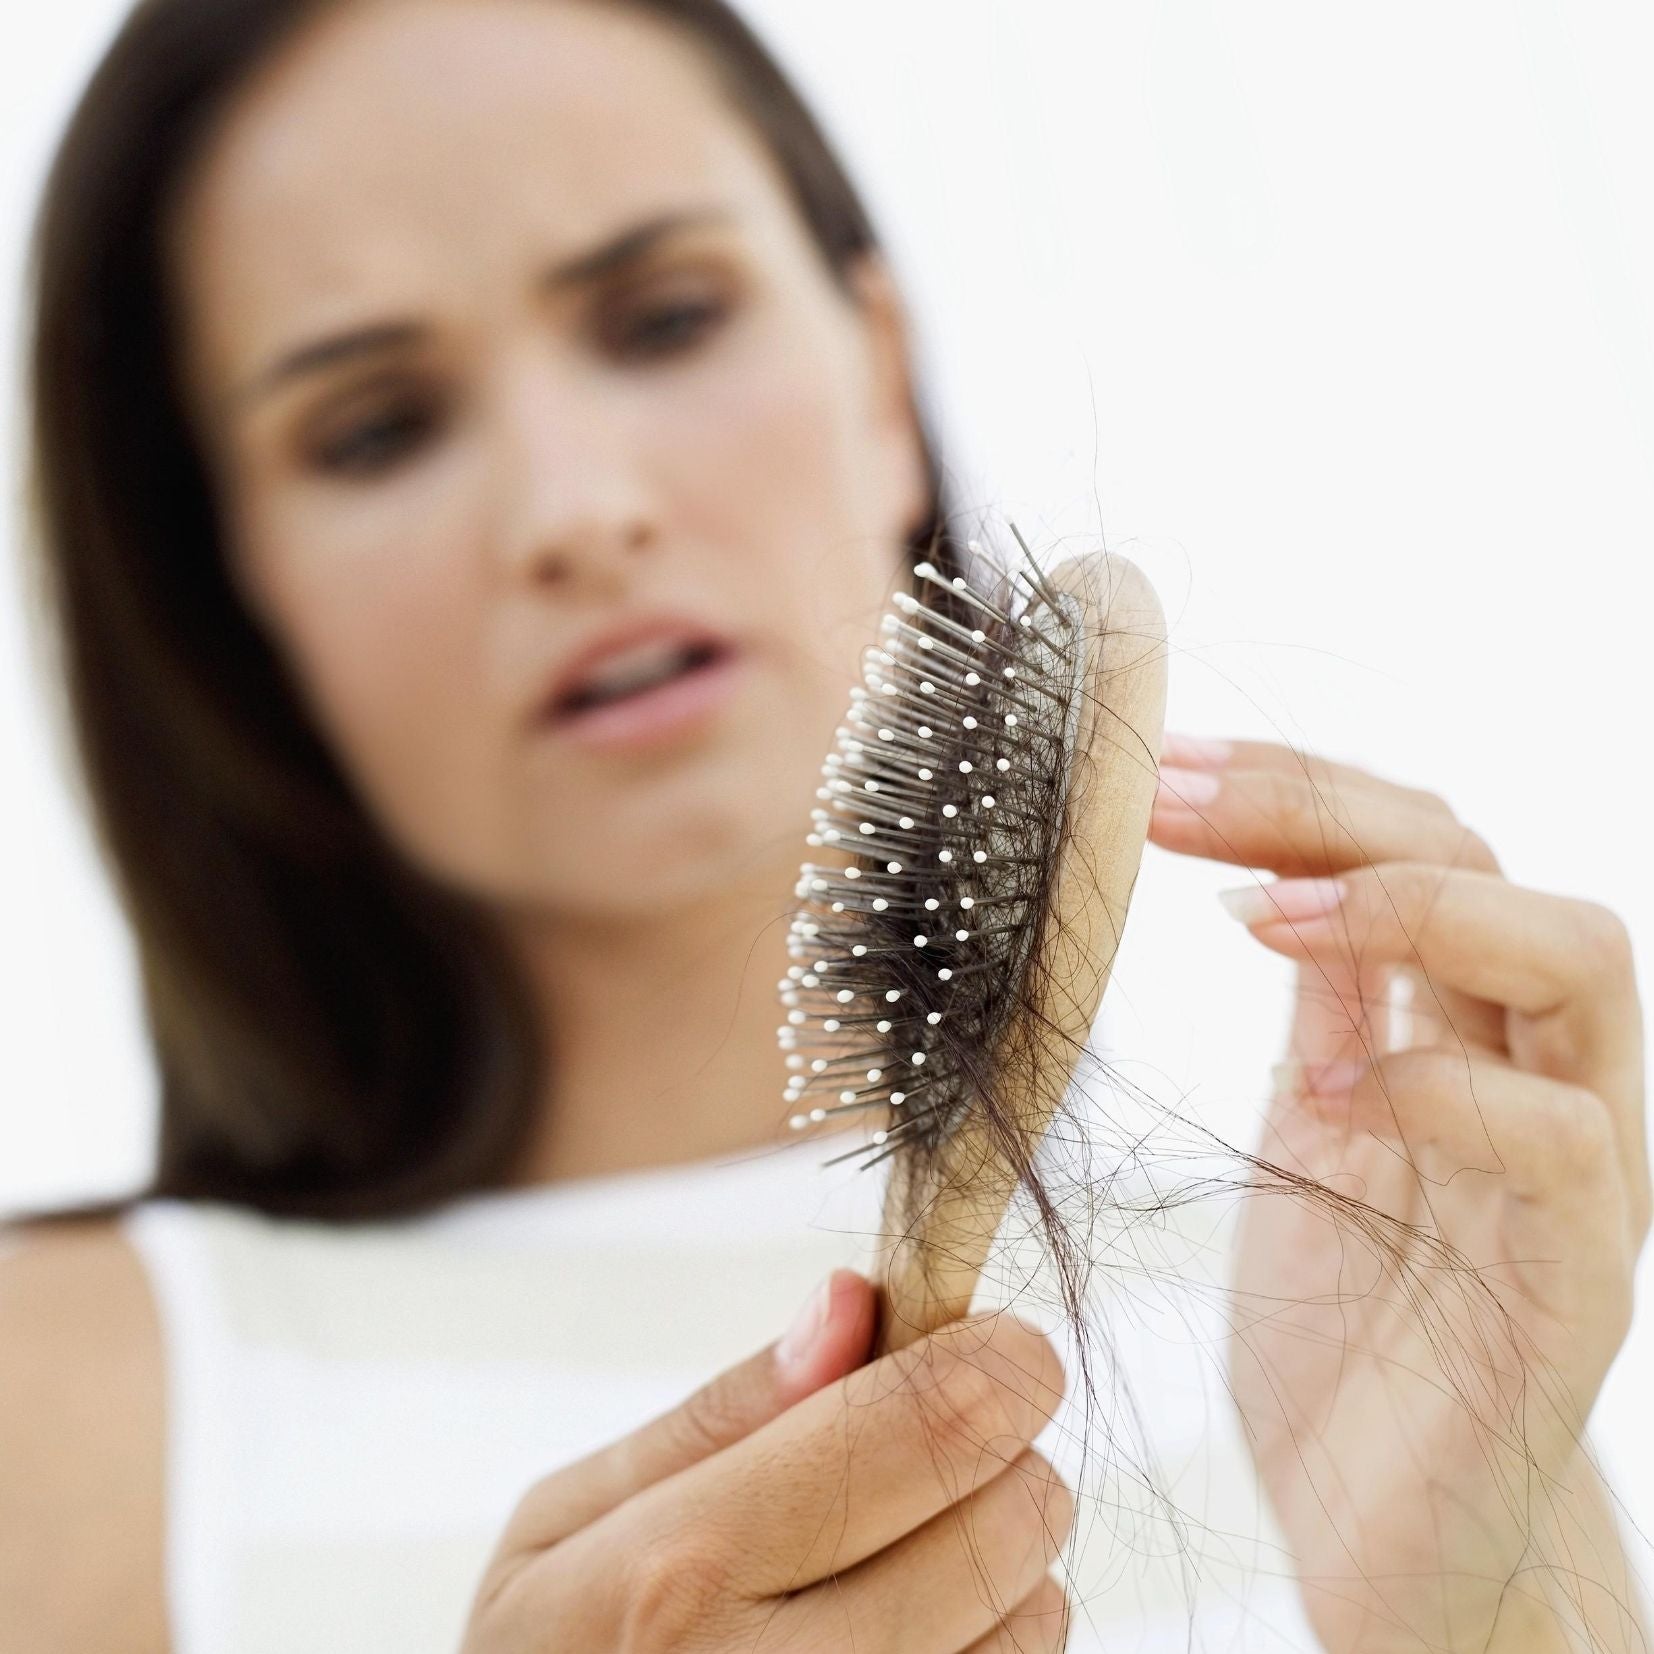 Ways You Can Lessen Hair Loss And Excessive Shedding